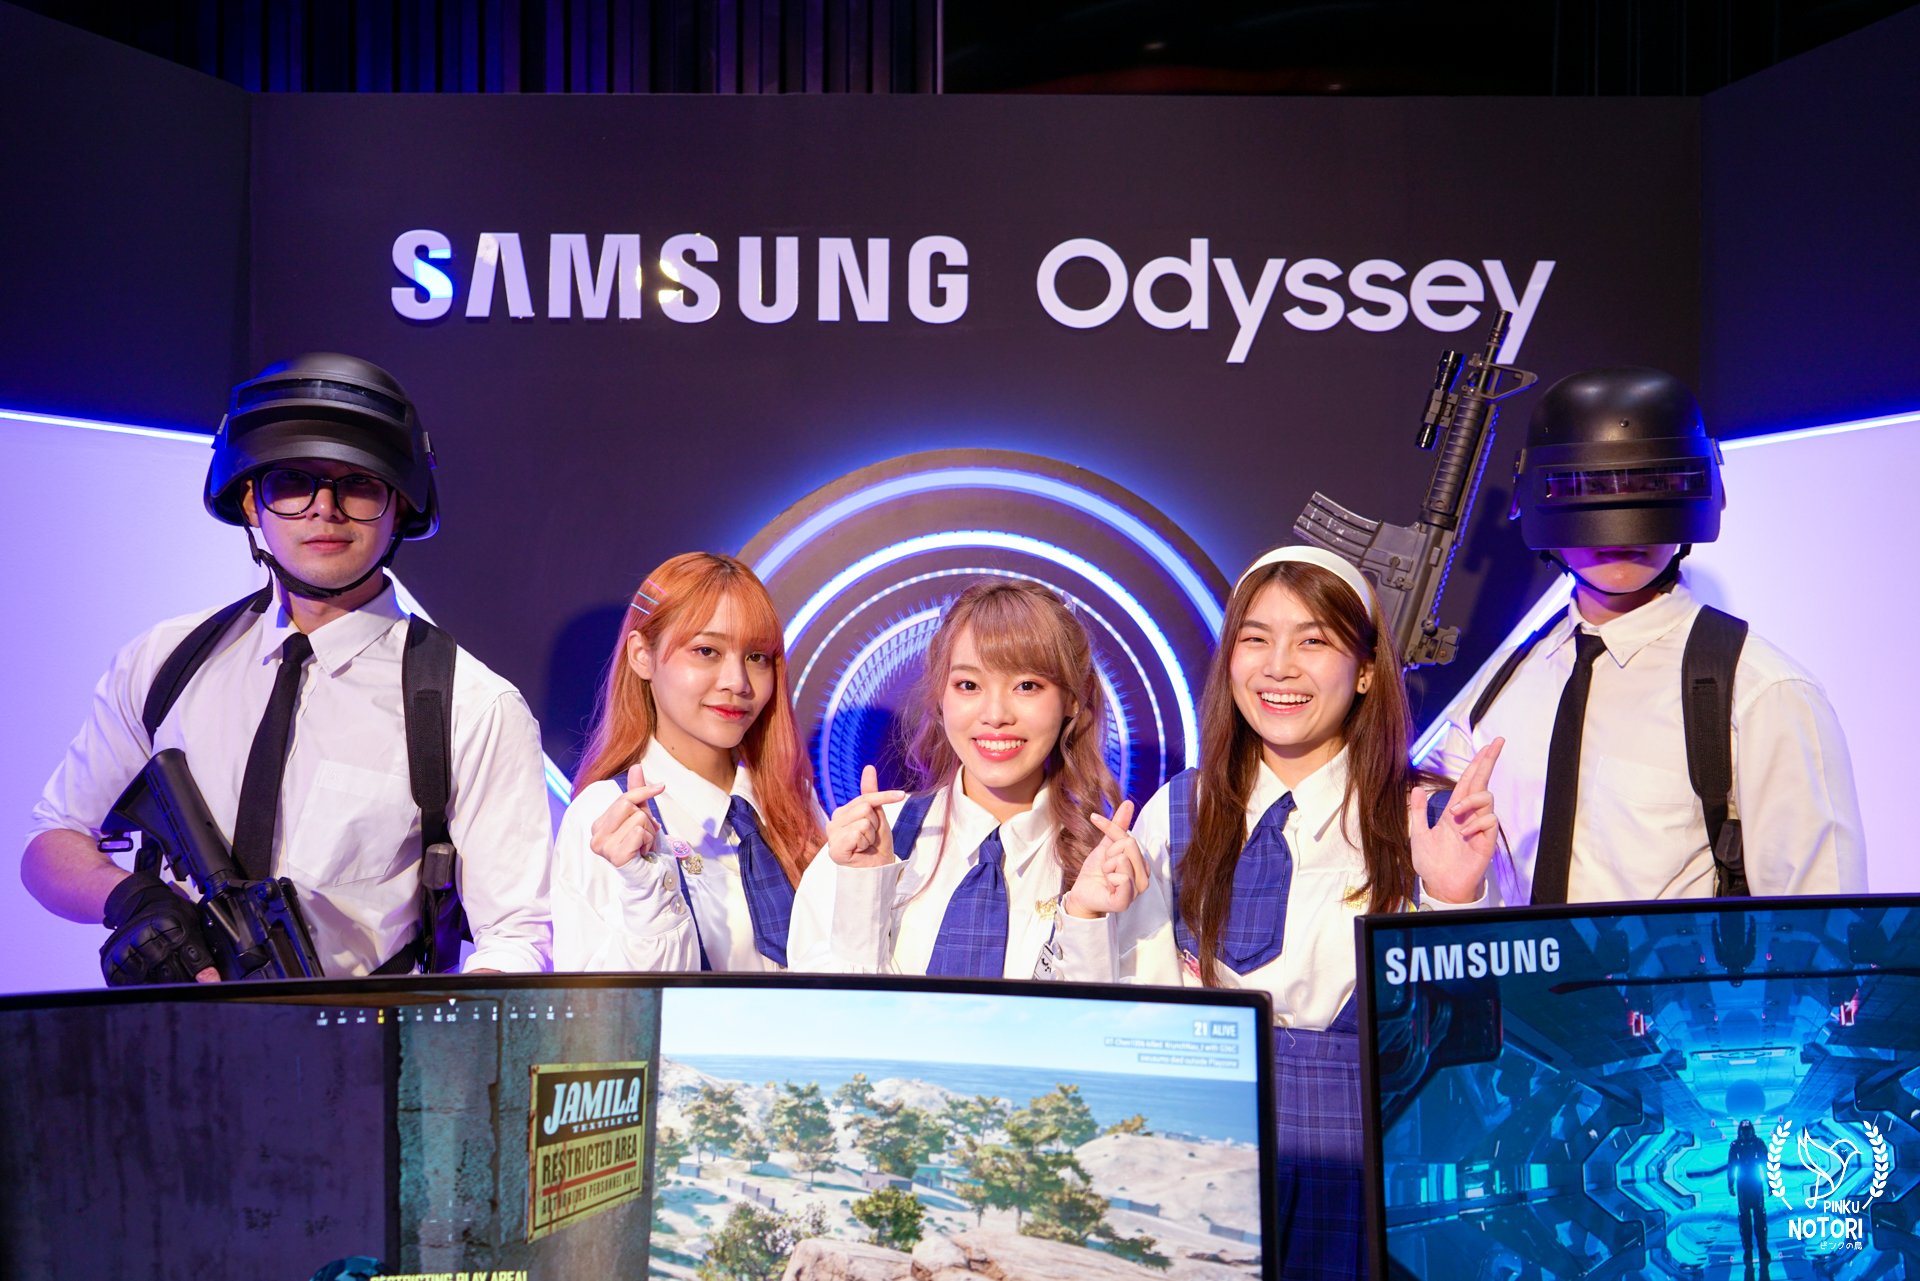 Samsung Odyssey Media Launch and Blogger Day